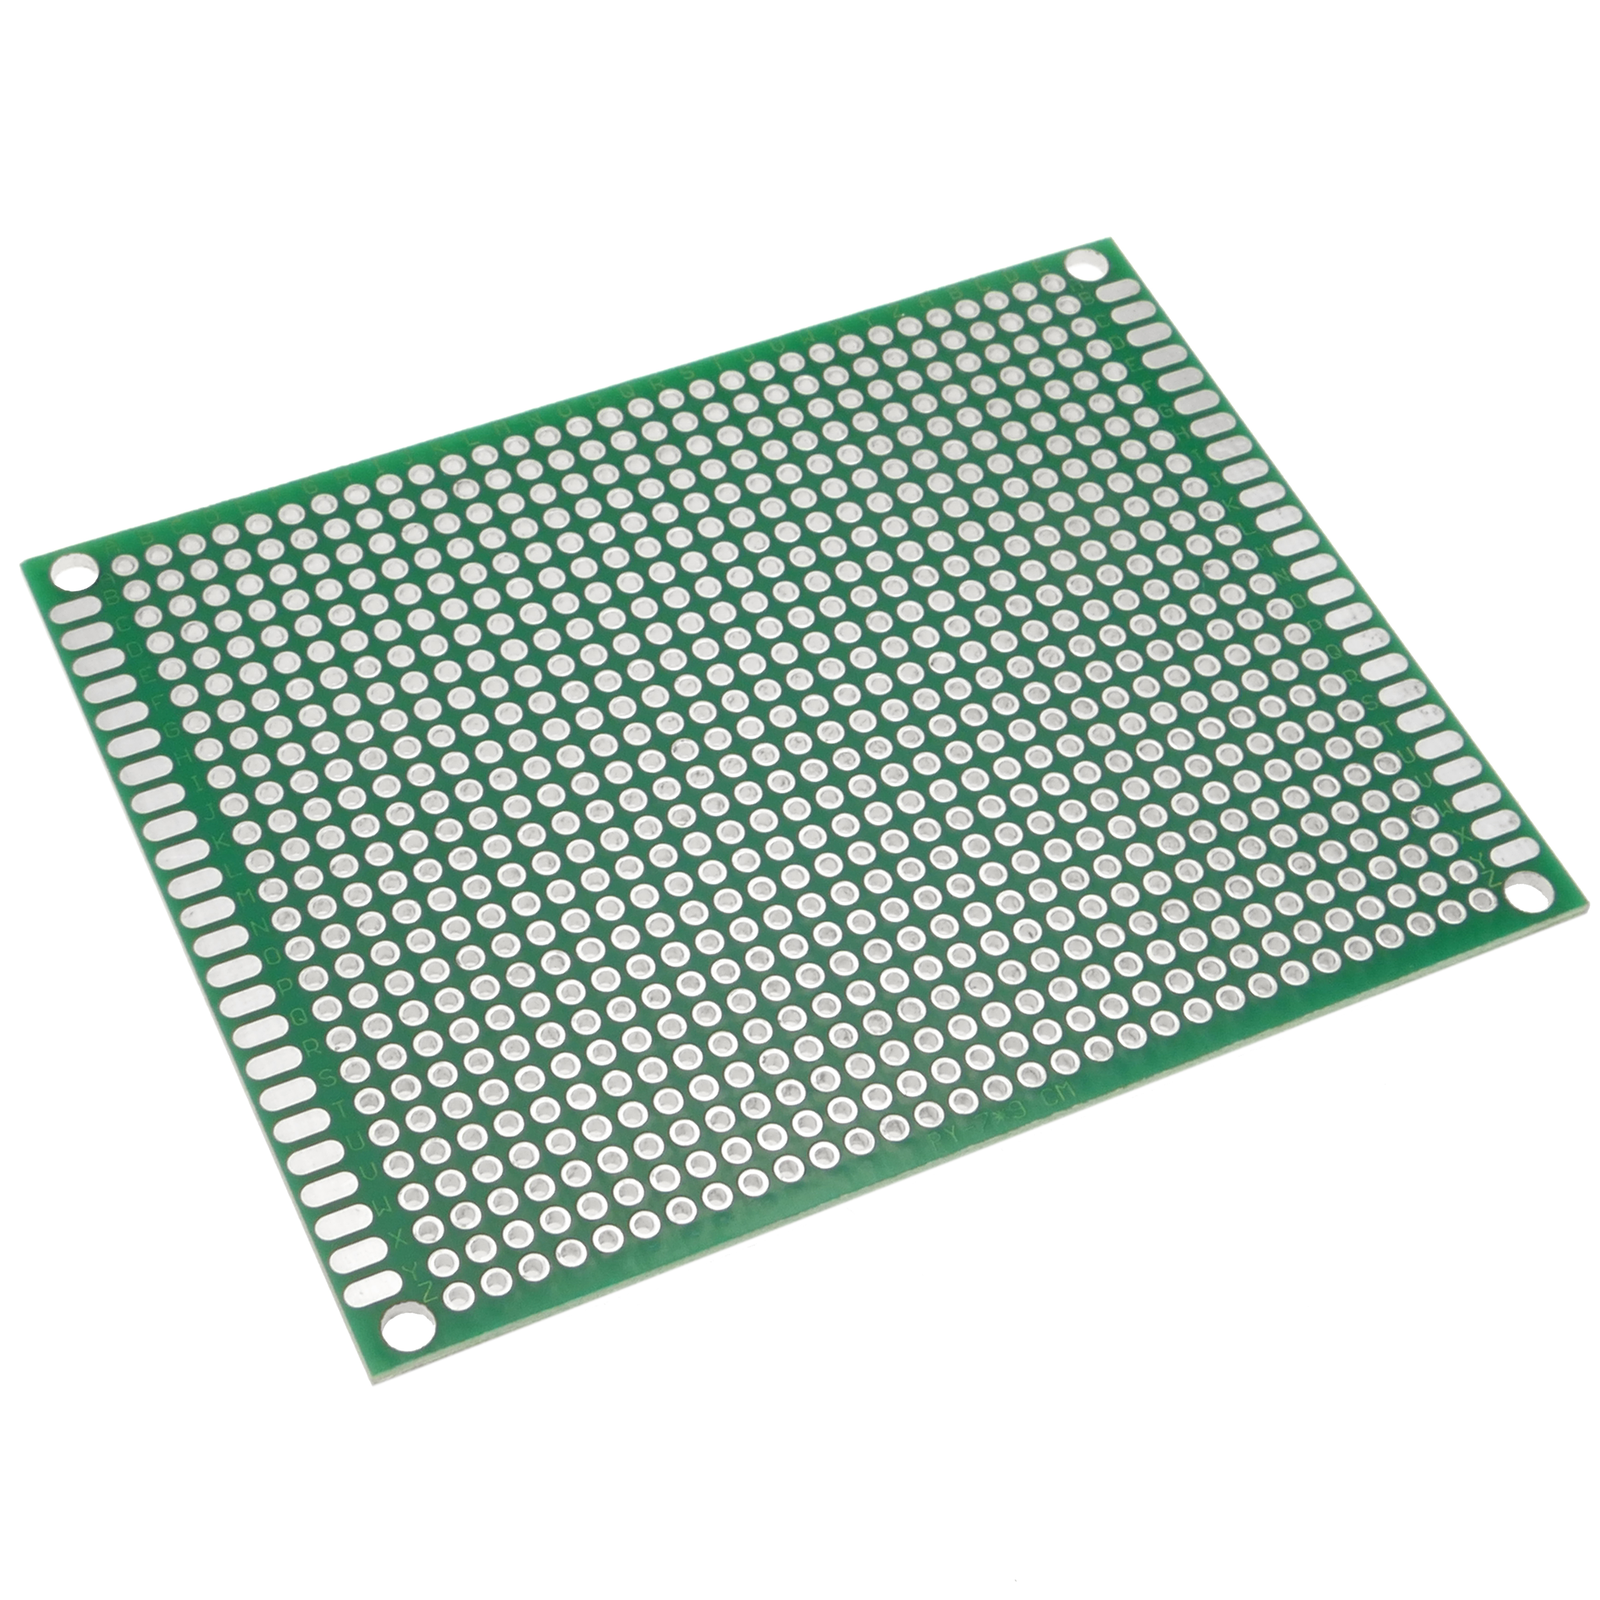 15x20cm Double Sided Universal PCB Prototype Soldering Circuit Board 4 Pack 